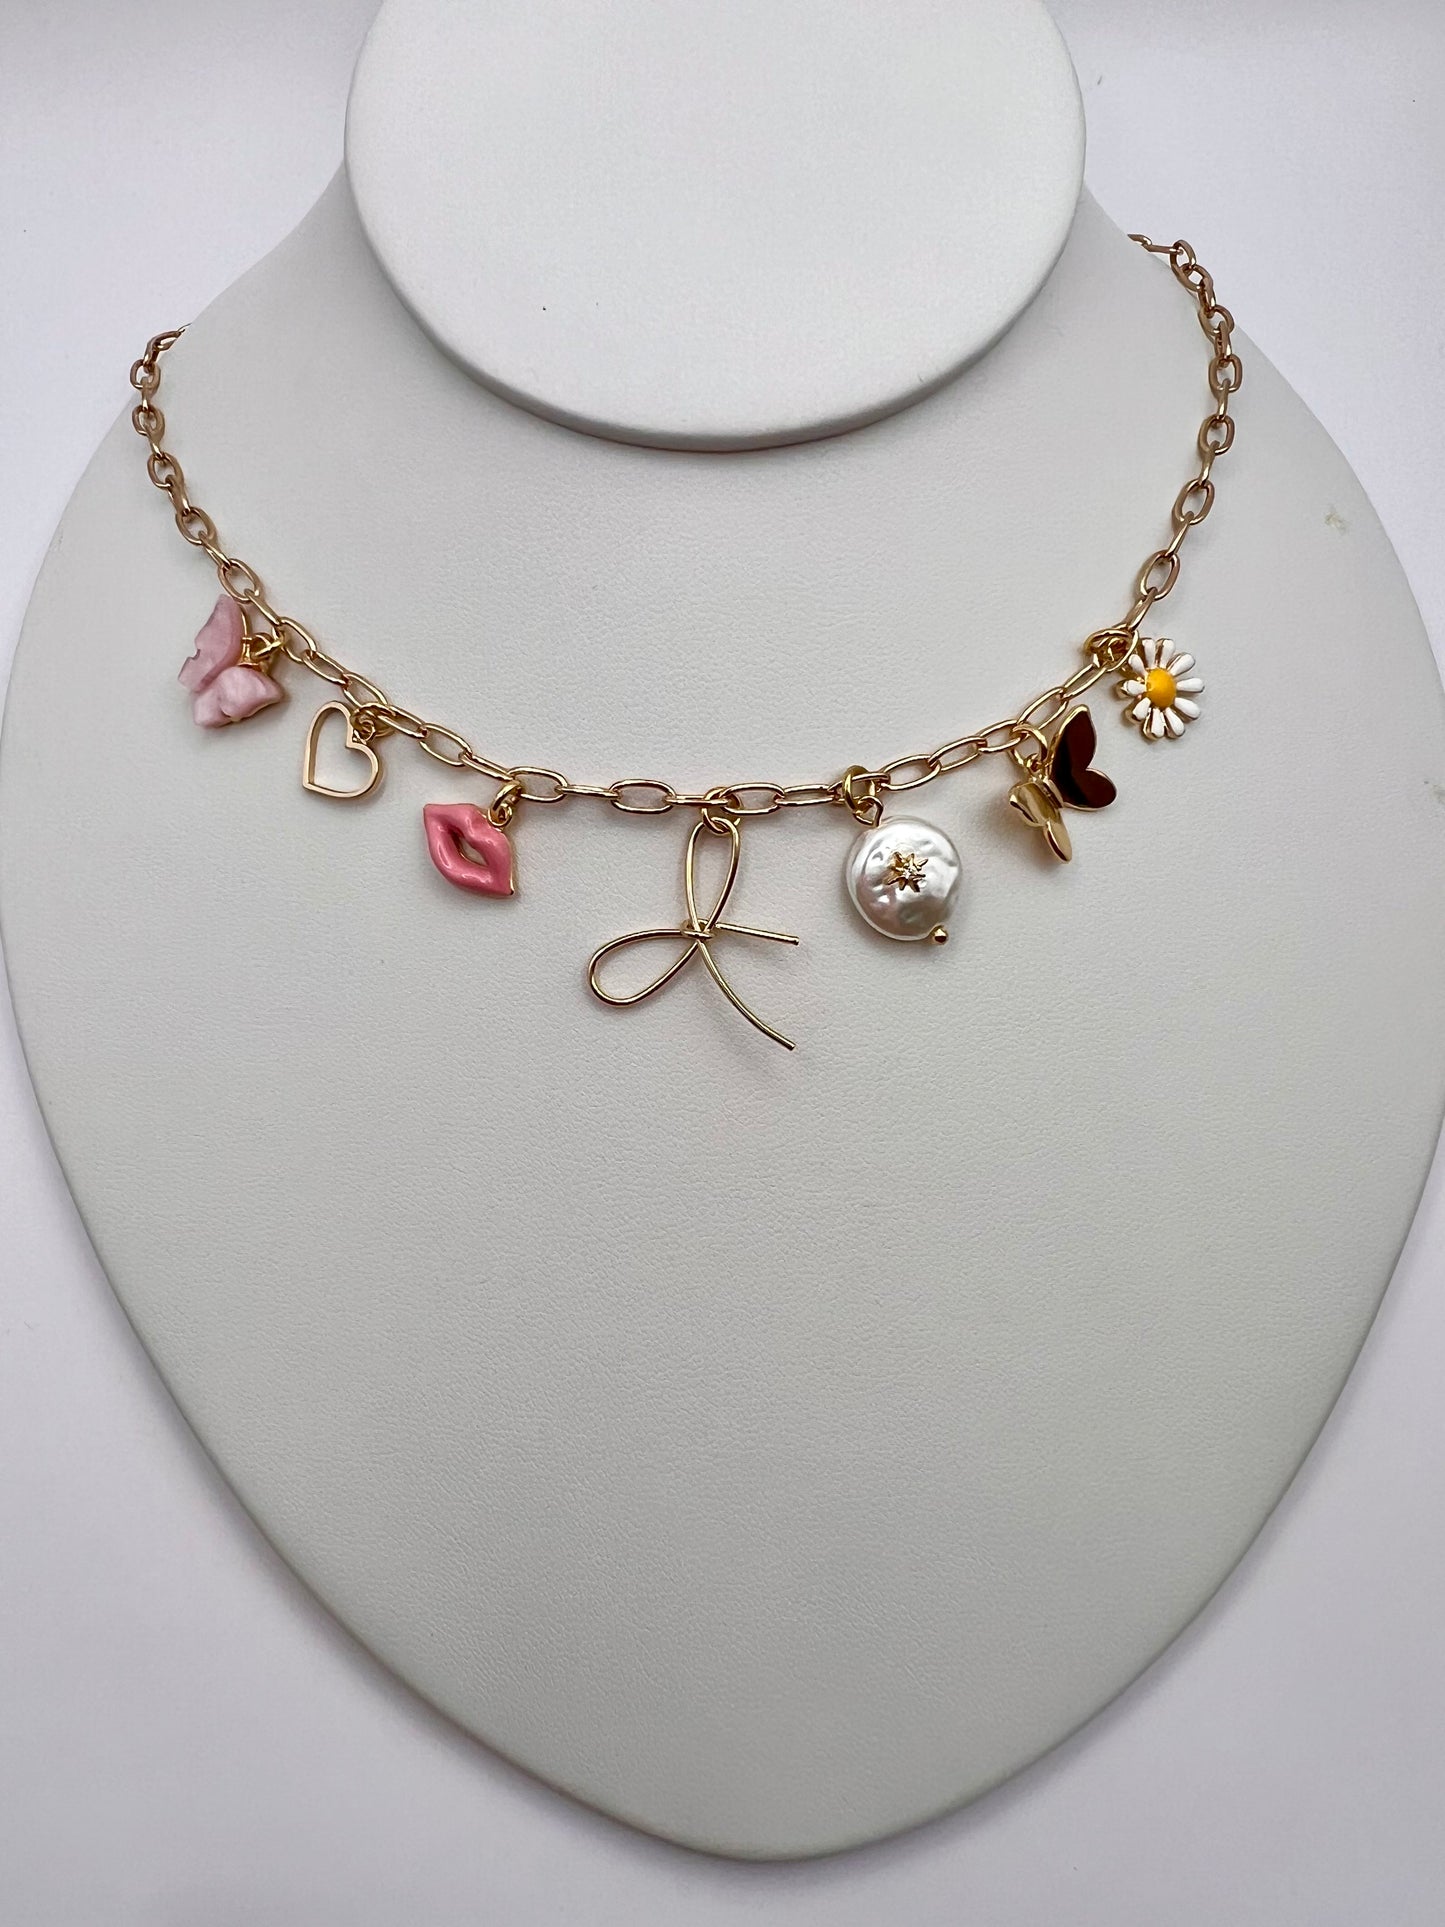 Charm - Butterfly - Gold